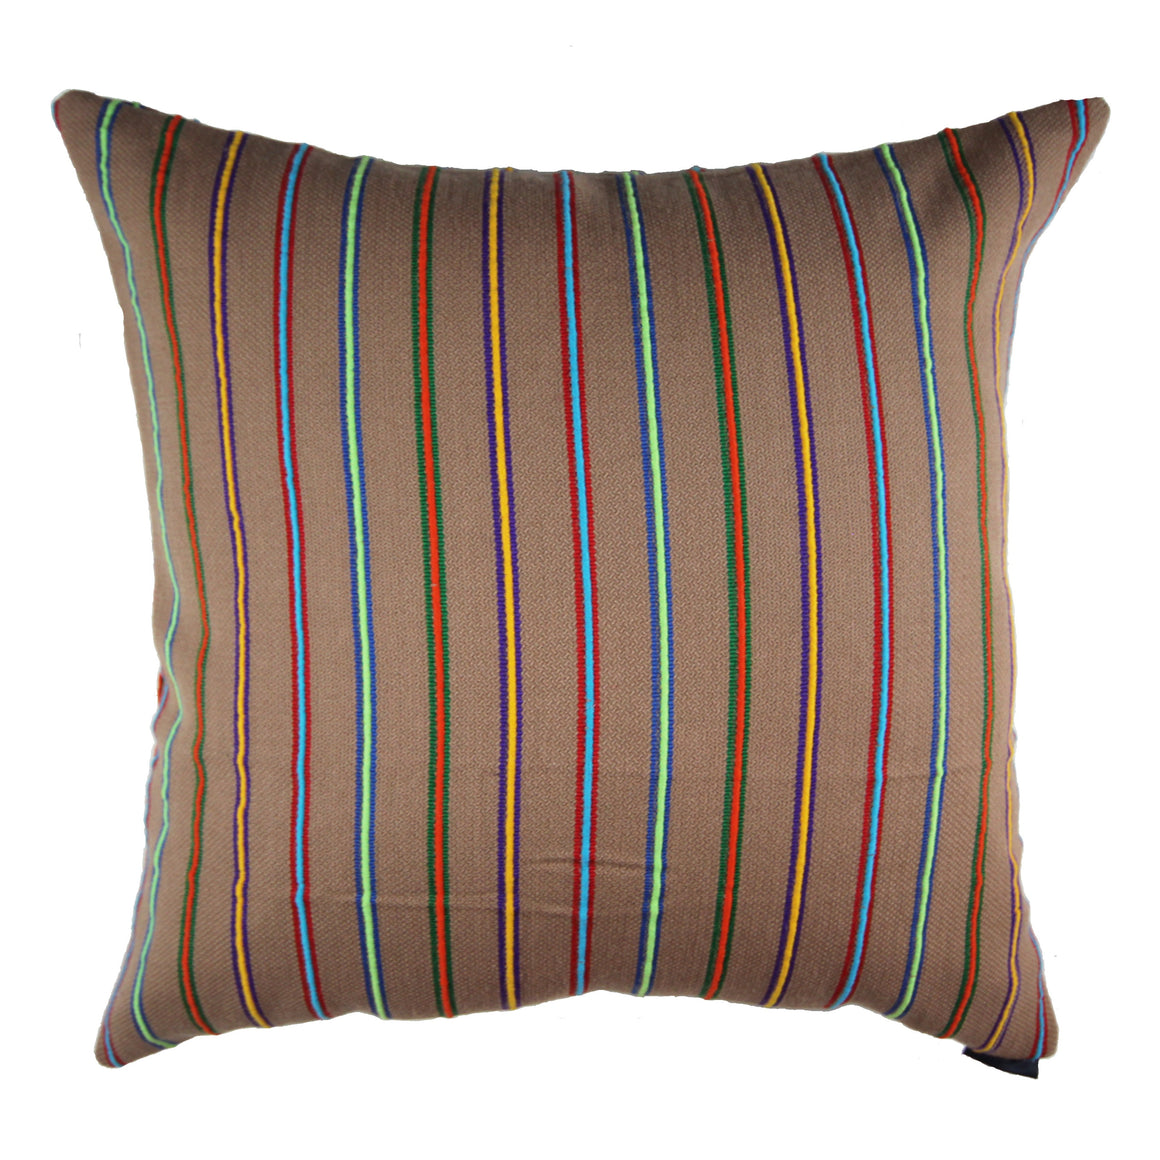 Delphine - Brown and Multicolered Striped Pillow Cover - 22x22 - 24x22